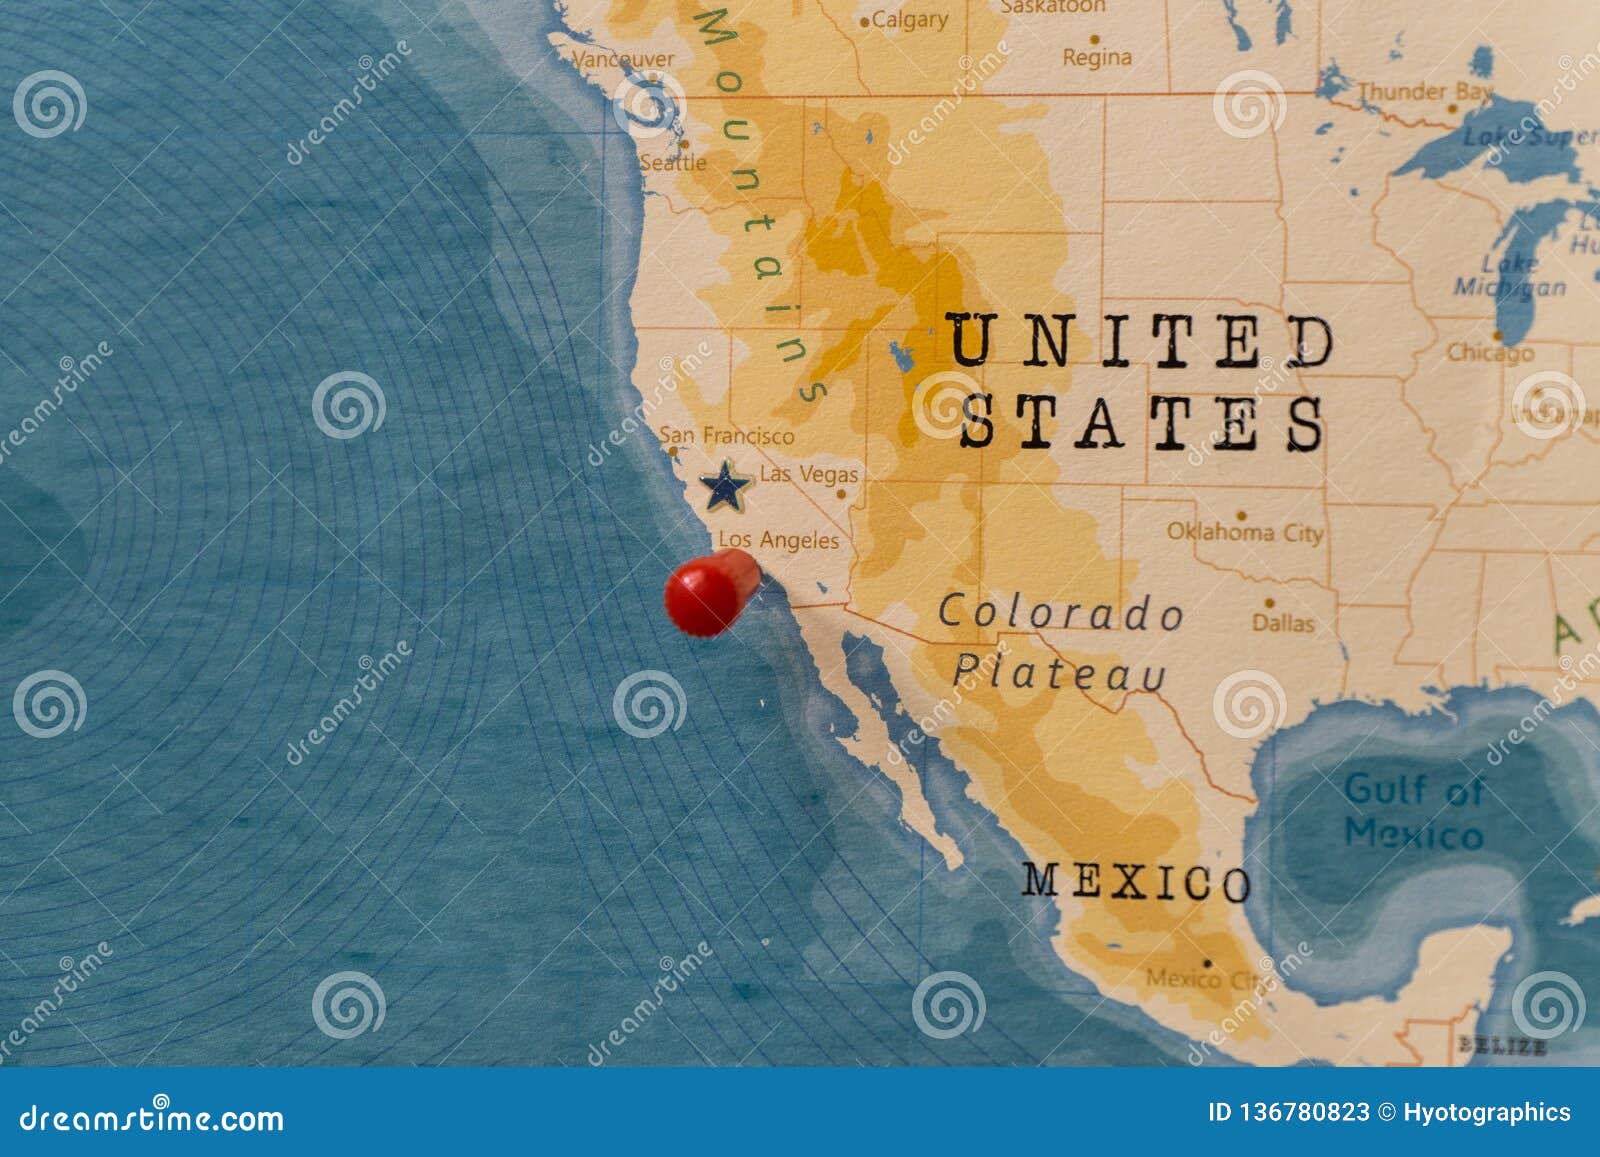 A Pin On Los Angeles United States In The World Map Stock Image